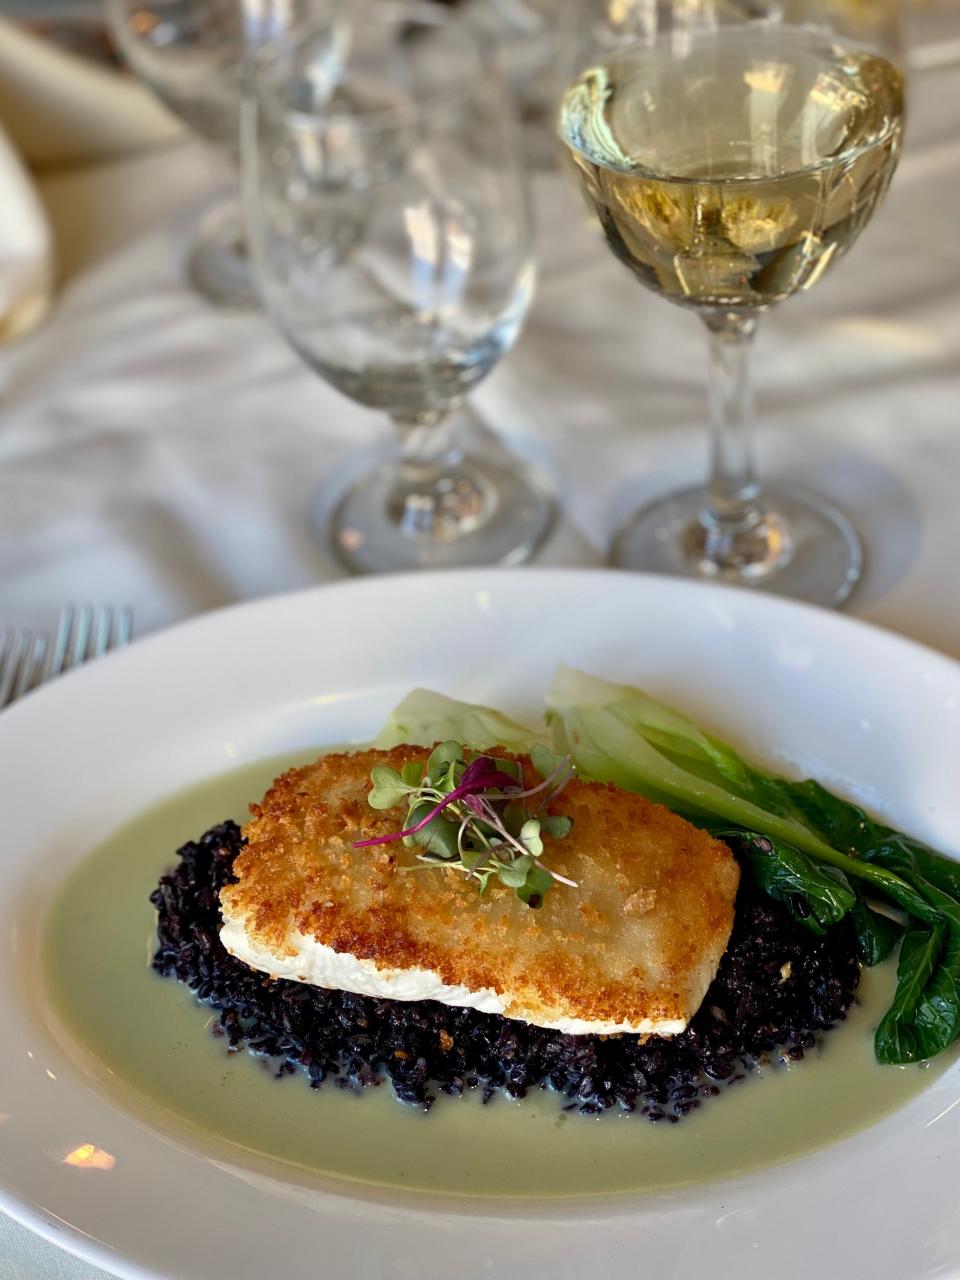 Halibut with black forbidden rice is on the Valentine's Day menu at Cafe Panache in Ramsey